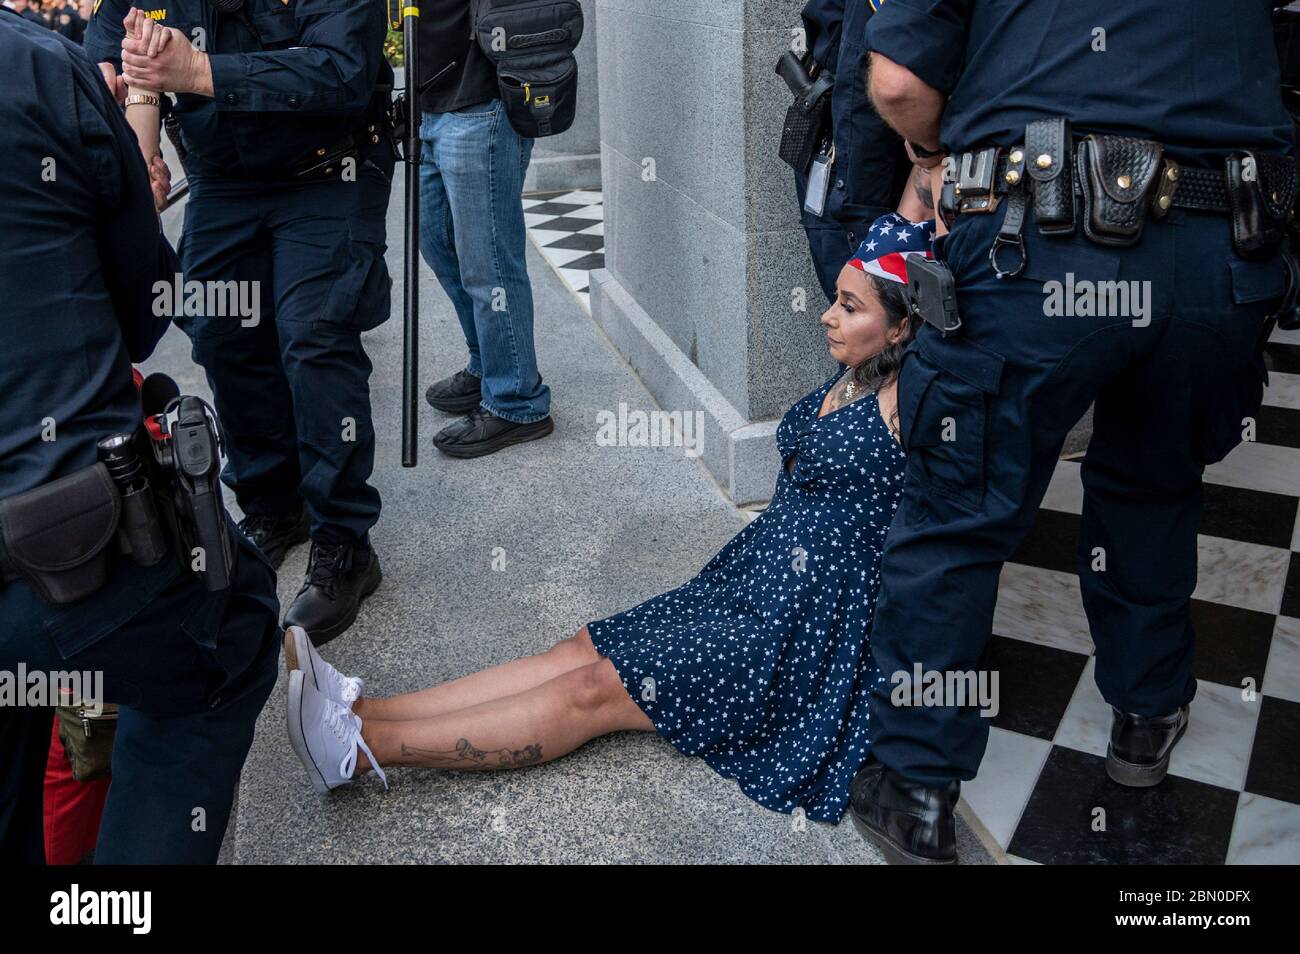 Sacramento, California, USA. 2nd May, 2019. A protester is arrested at the Capitol in Sacramento on May Day, while demonstrating against California Gov. Gavin Newsom's stay-at-home order to slow the spread of the coronavirus. Credit: Renee C. Byer/Sacramento Bee/ZUMA Wire/Alamy Live News Stock Photo